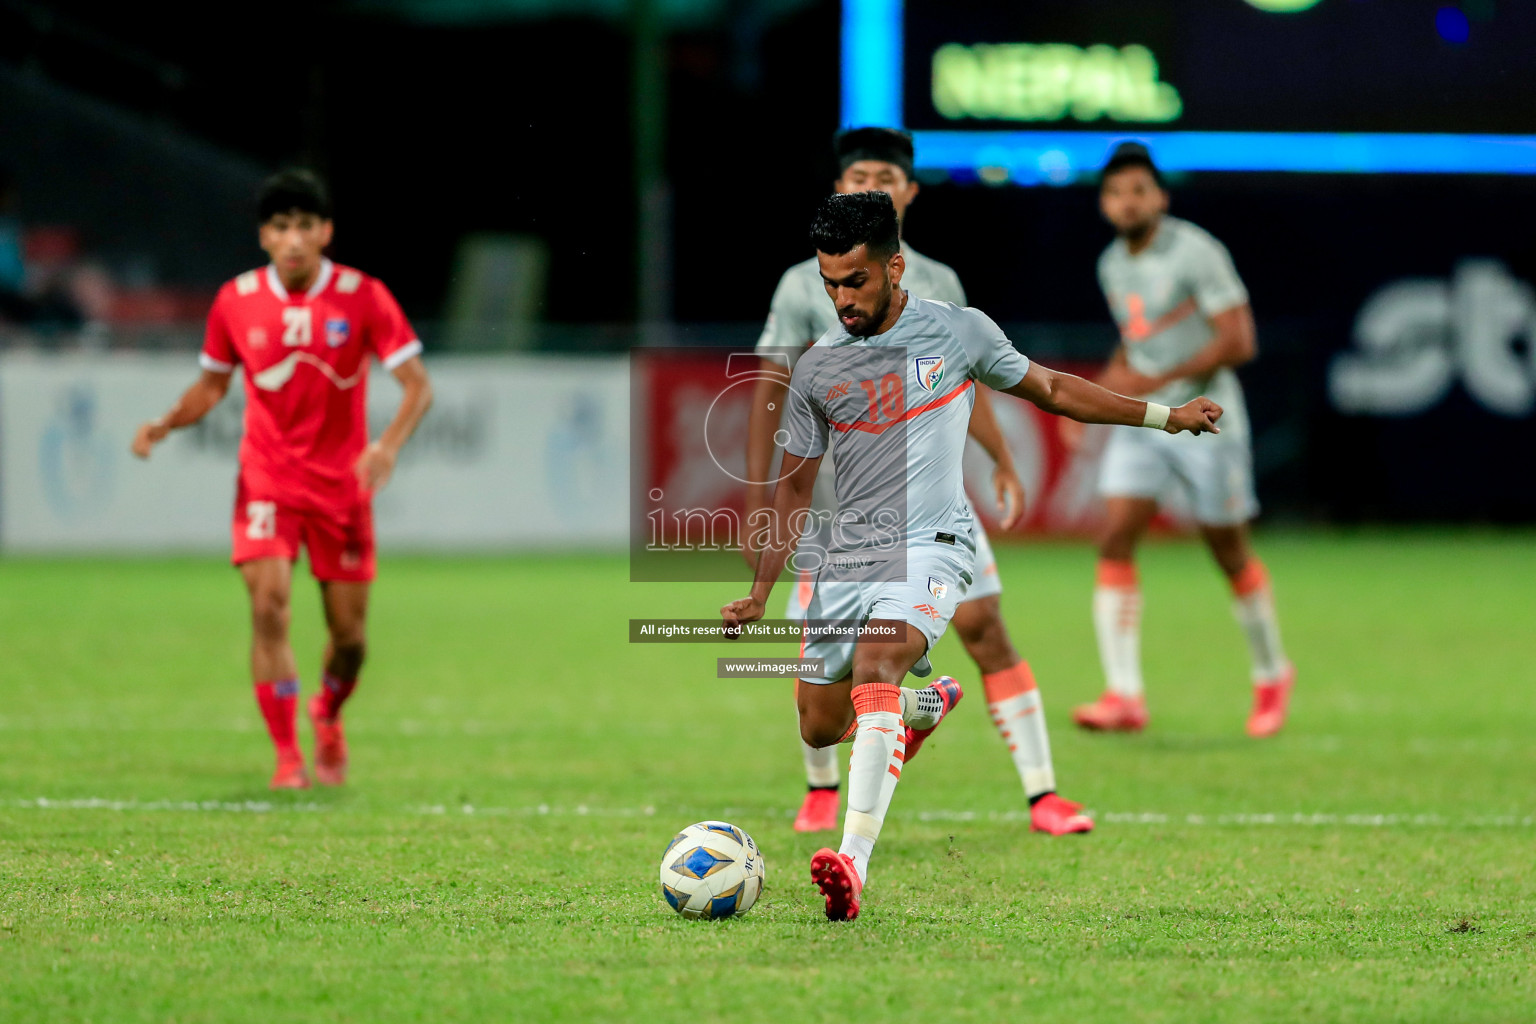 India vs Nepal in SAFF Championship 2021 held on 10th October 2021 in Galolhu National Stadium, Male', Maldives